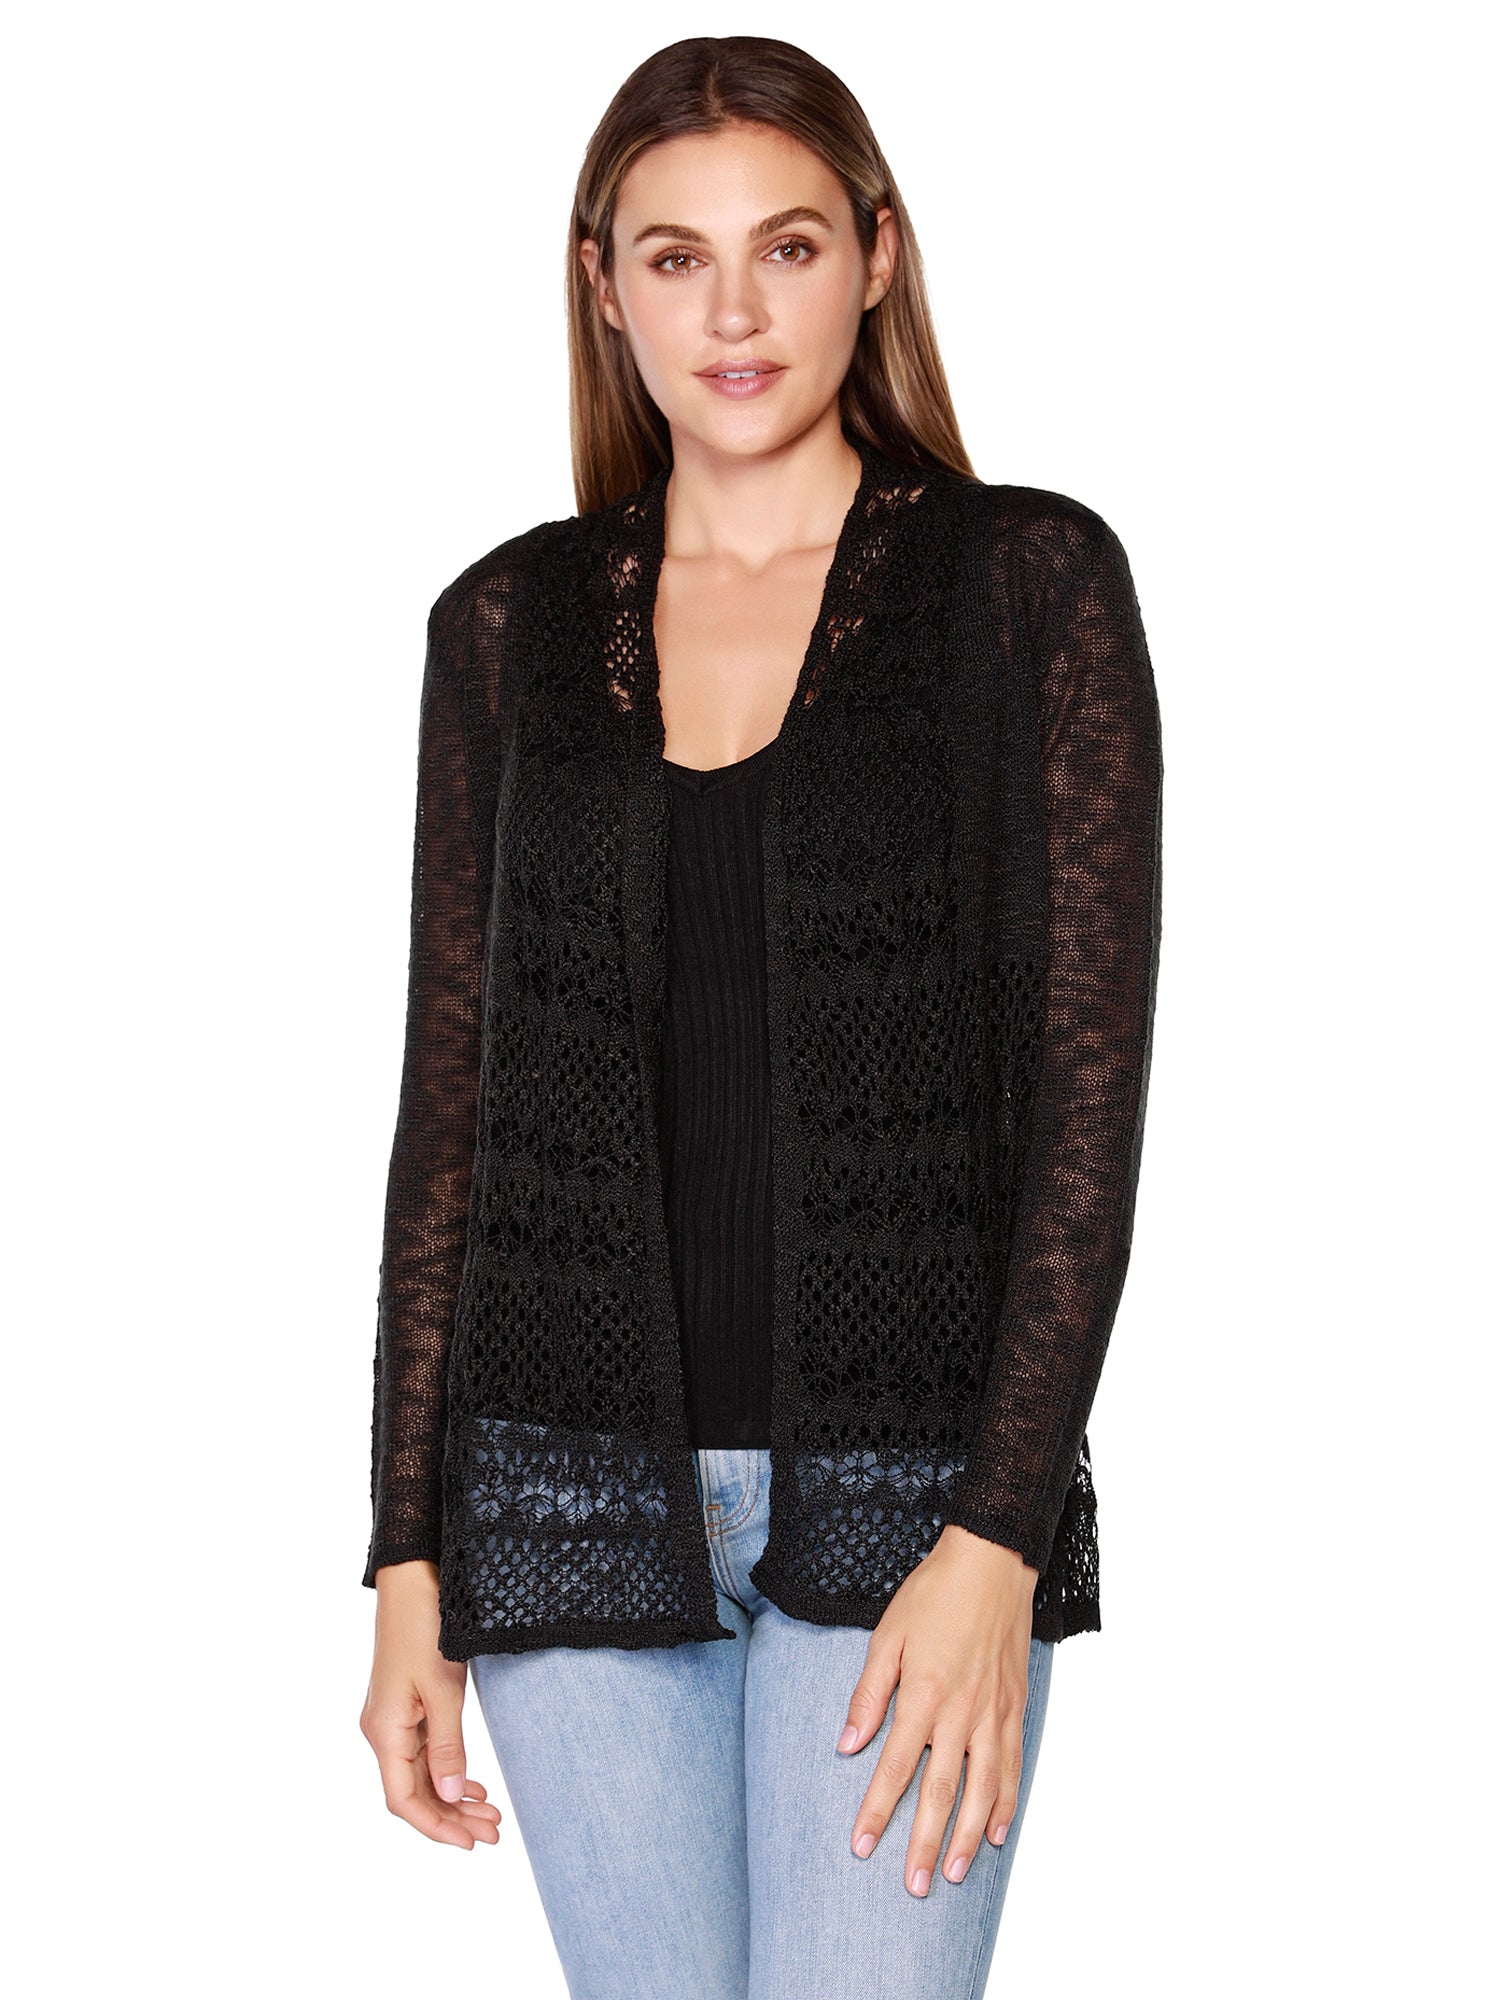 Women's Long Sleeve Crochet Swing Cardigan with Shawl Collar in a Soft Knit